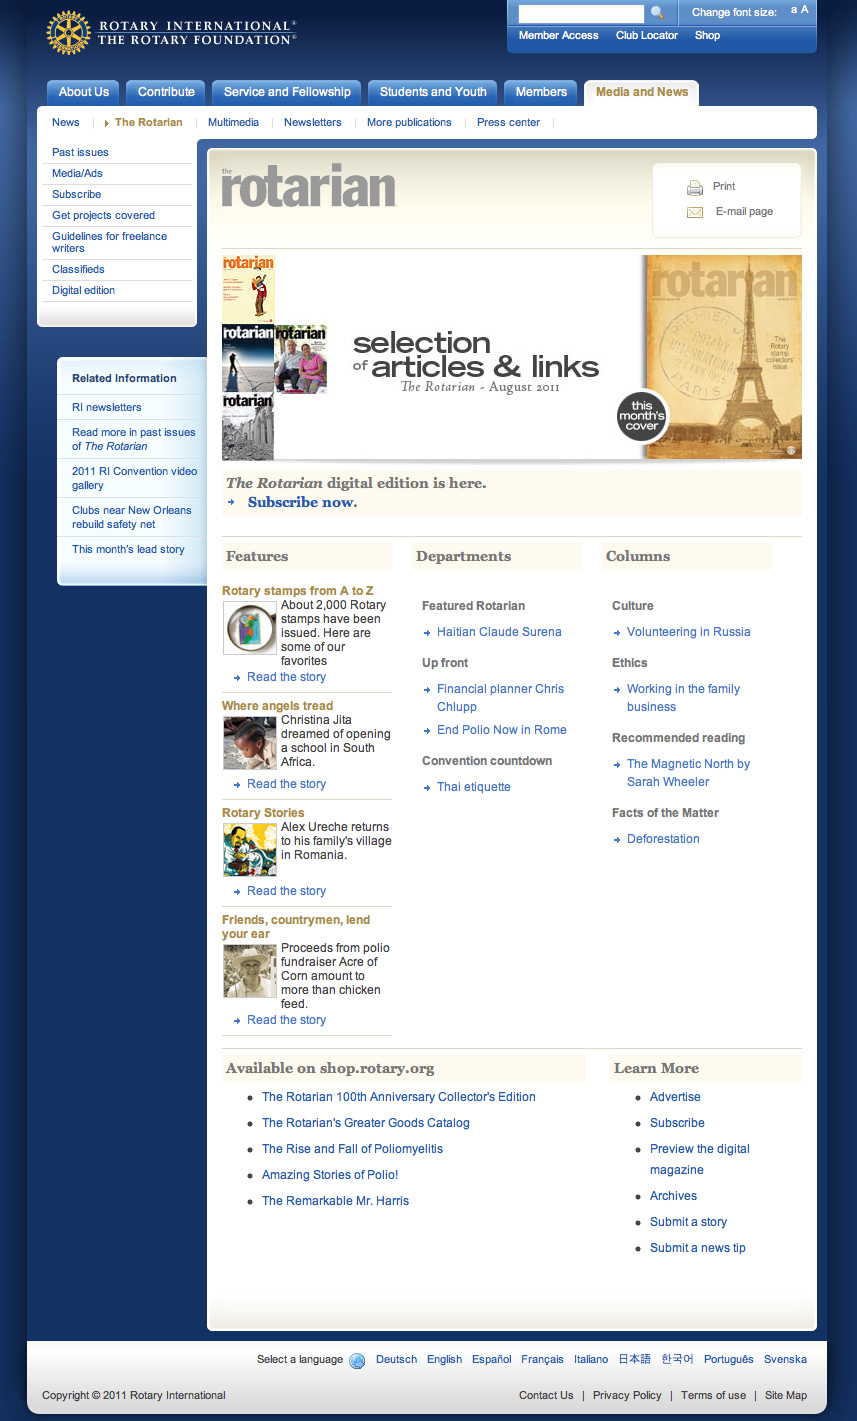 Image of Rotary International the rotarian page layout.